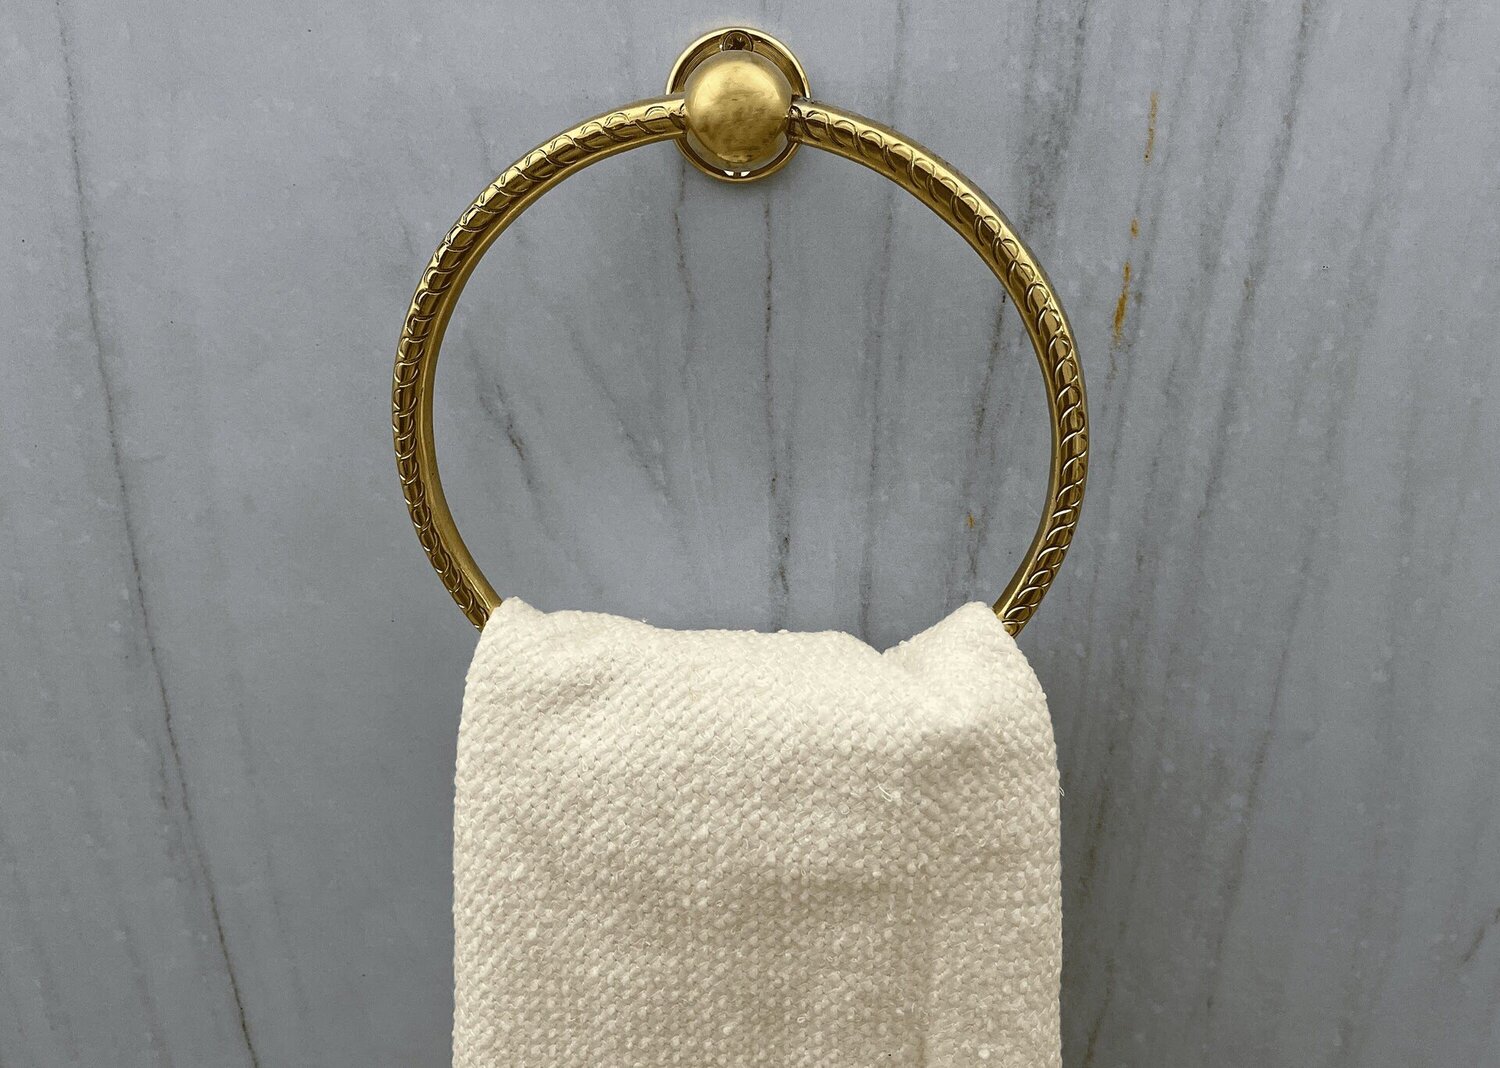 How To Replace Brass Towel Ring